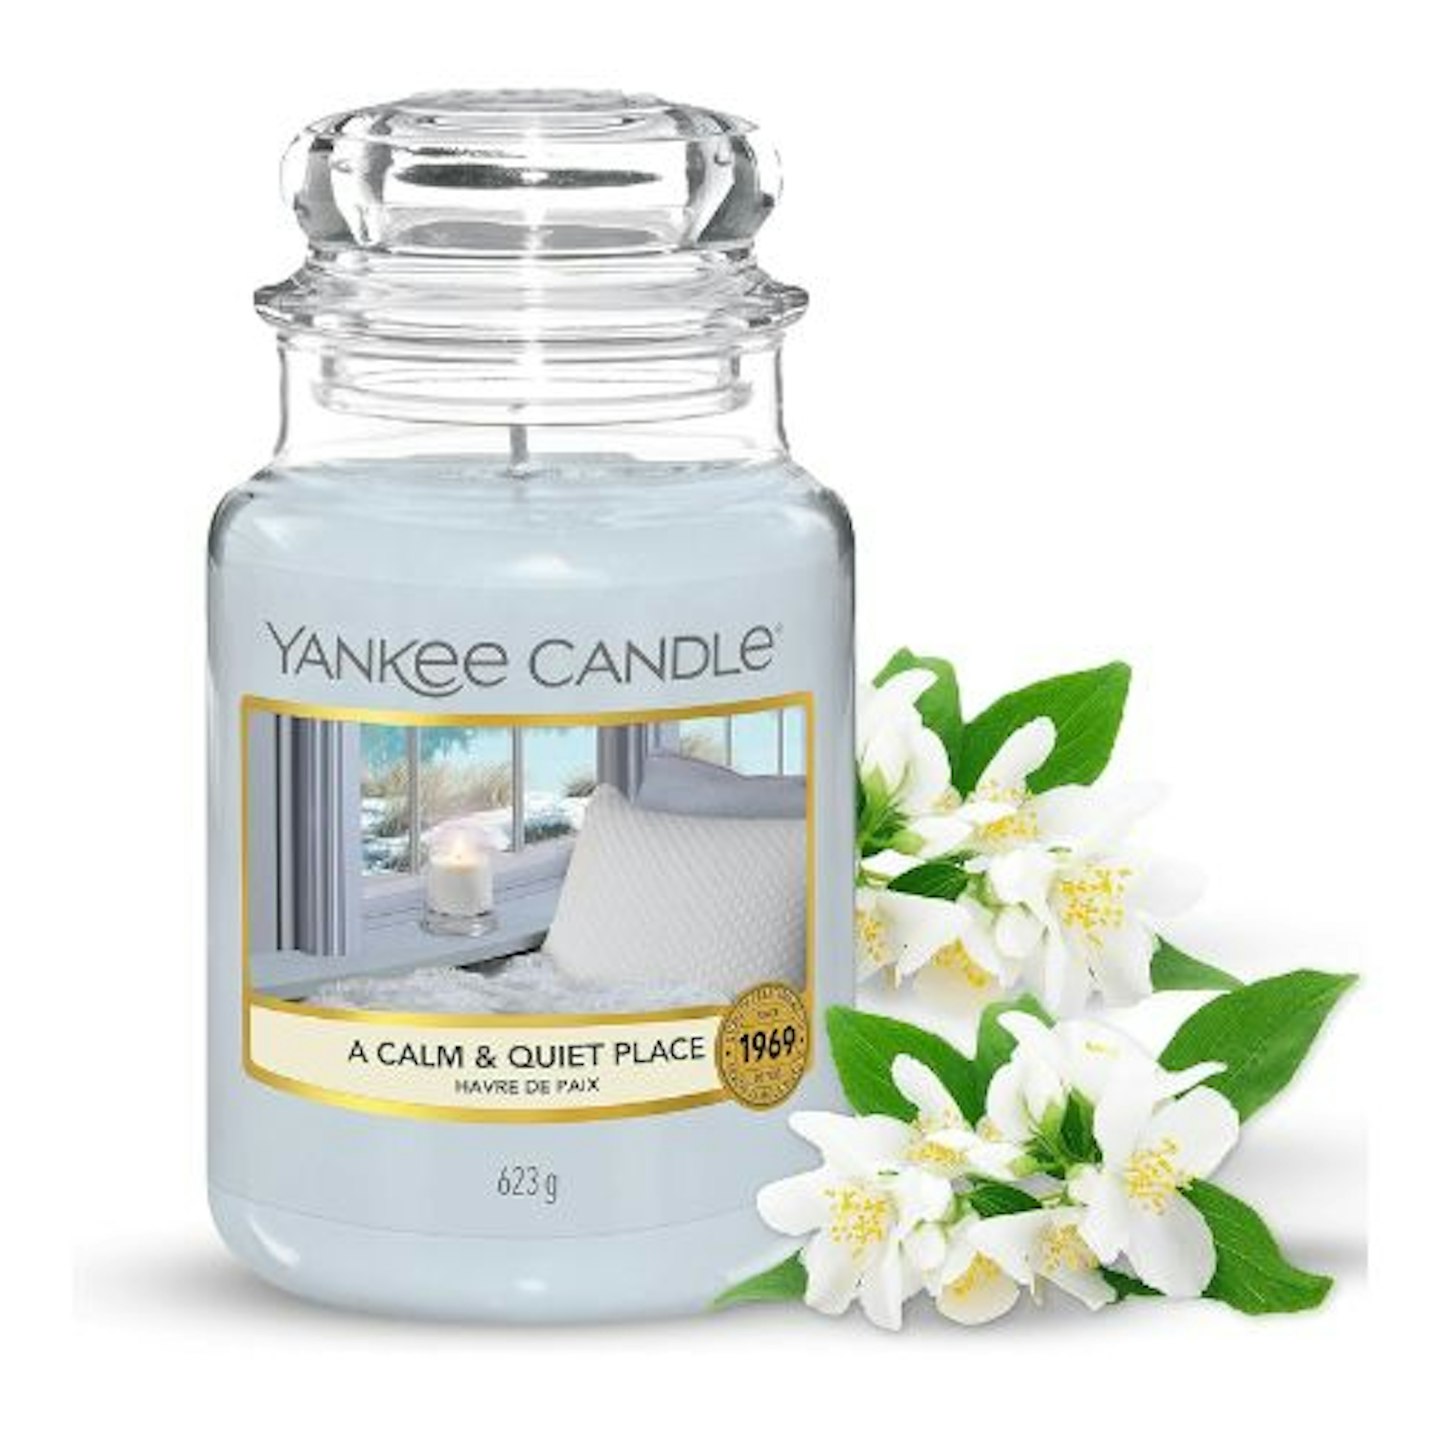 Yankee Candle Scented Candle | A Calm and Quiet Place Large Jar Candle | Long Burning Candles: up to 150 Hours